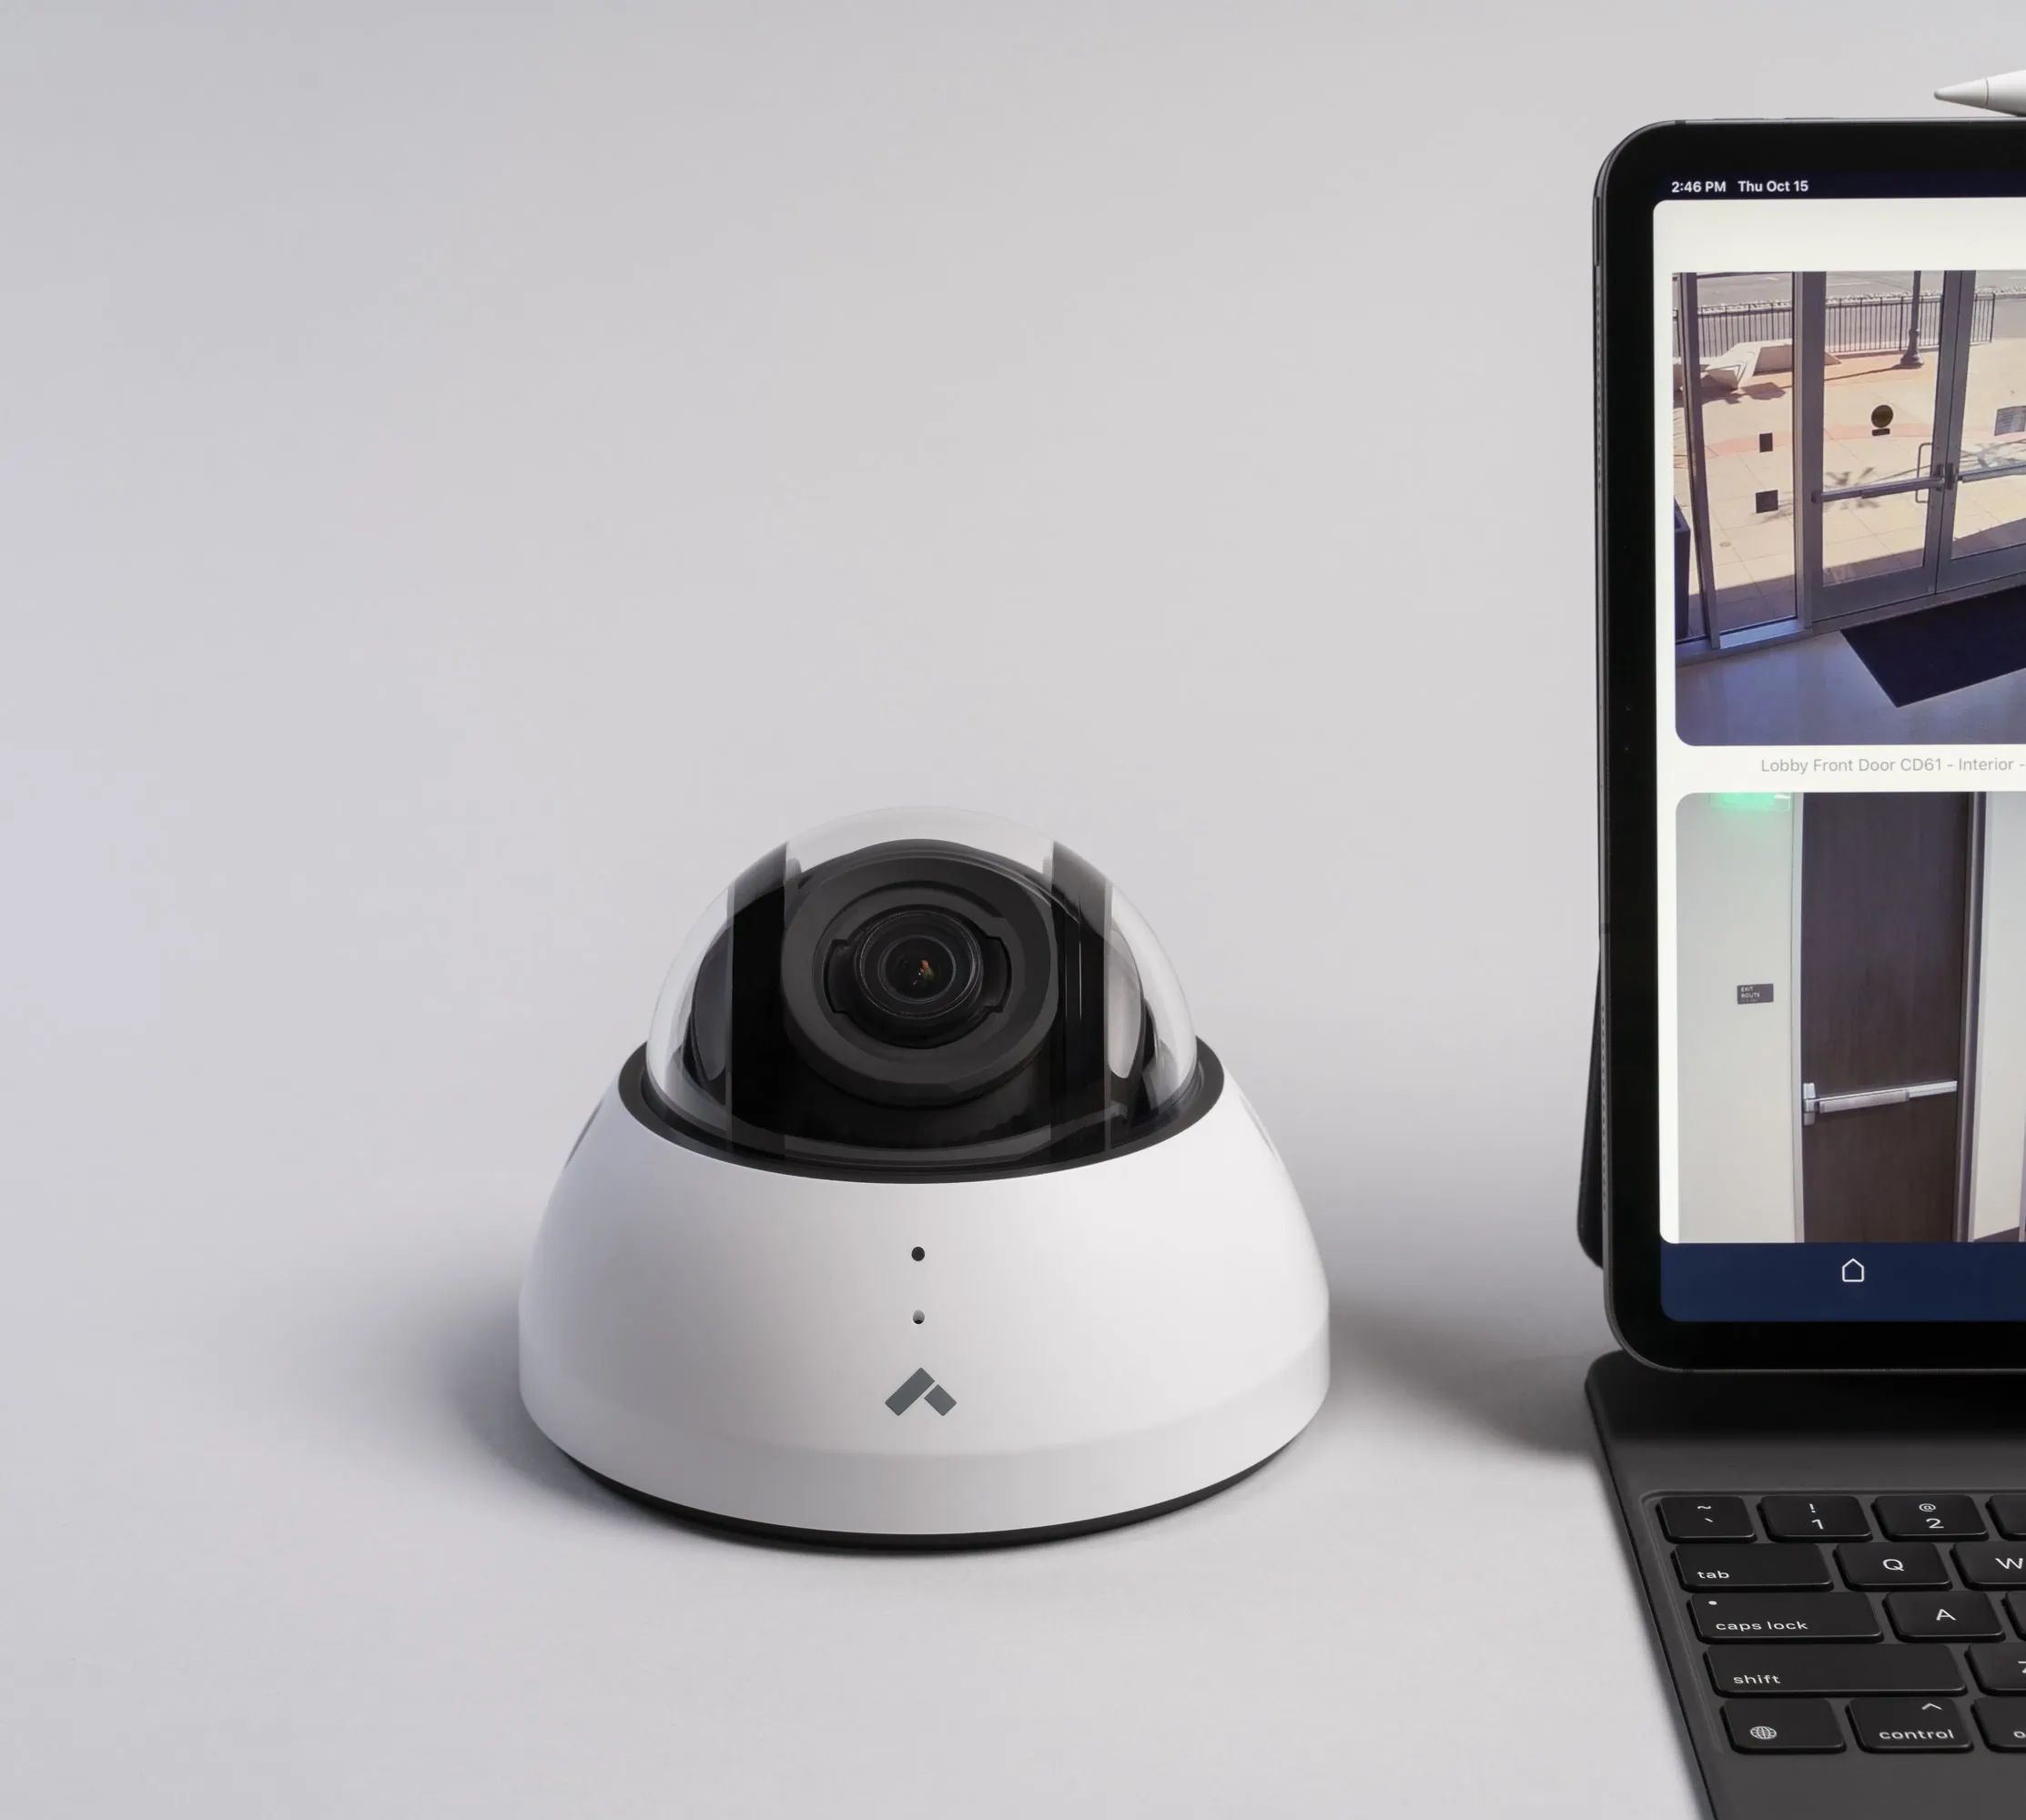 Verkada dome camera next to laptop displaying footage from a retail store with a Verkada security system